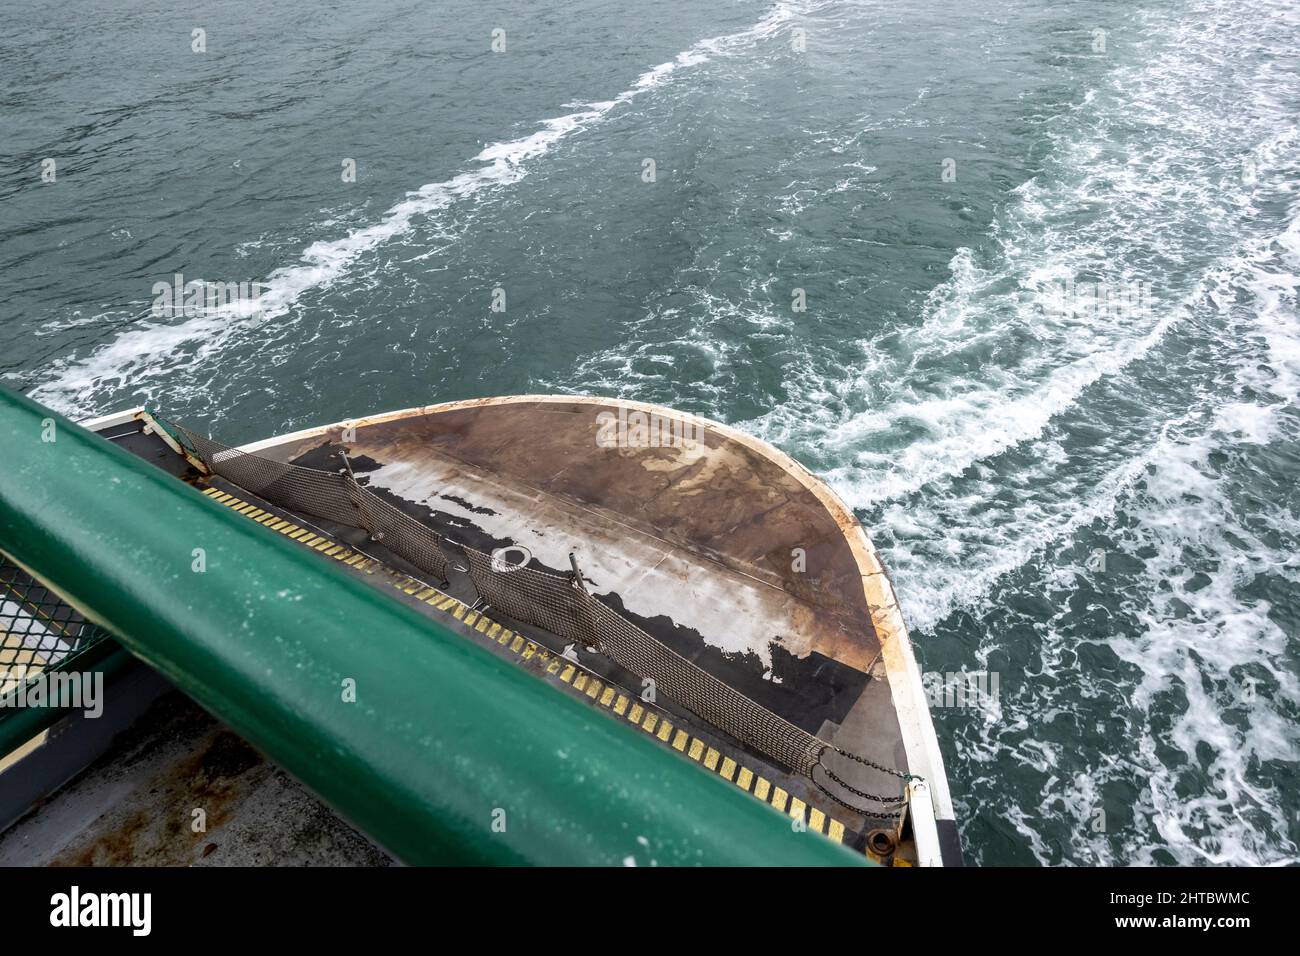 High angle view of the back of a Washington state ferry making its route to San Juan Island, waking the ocean water behind it on an overcast, rainy da Stock Photo